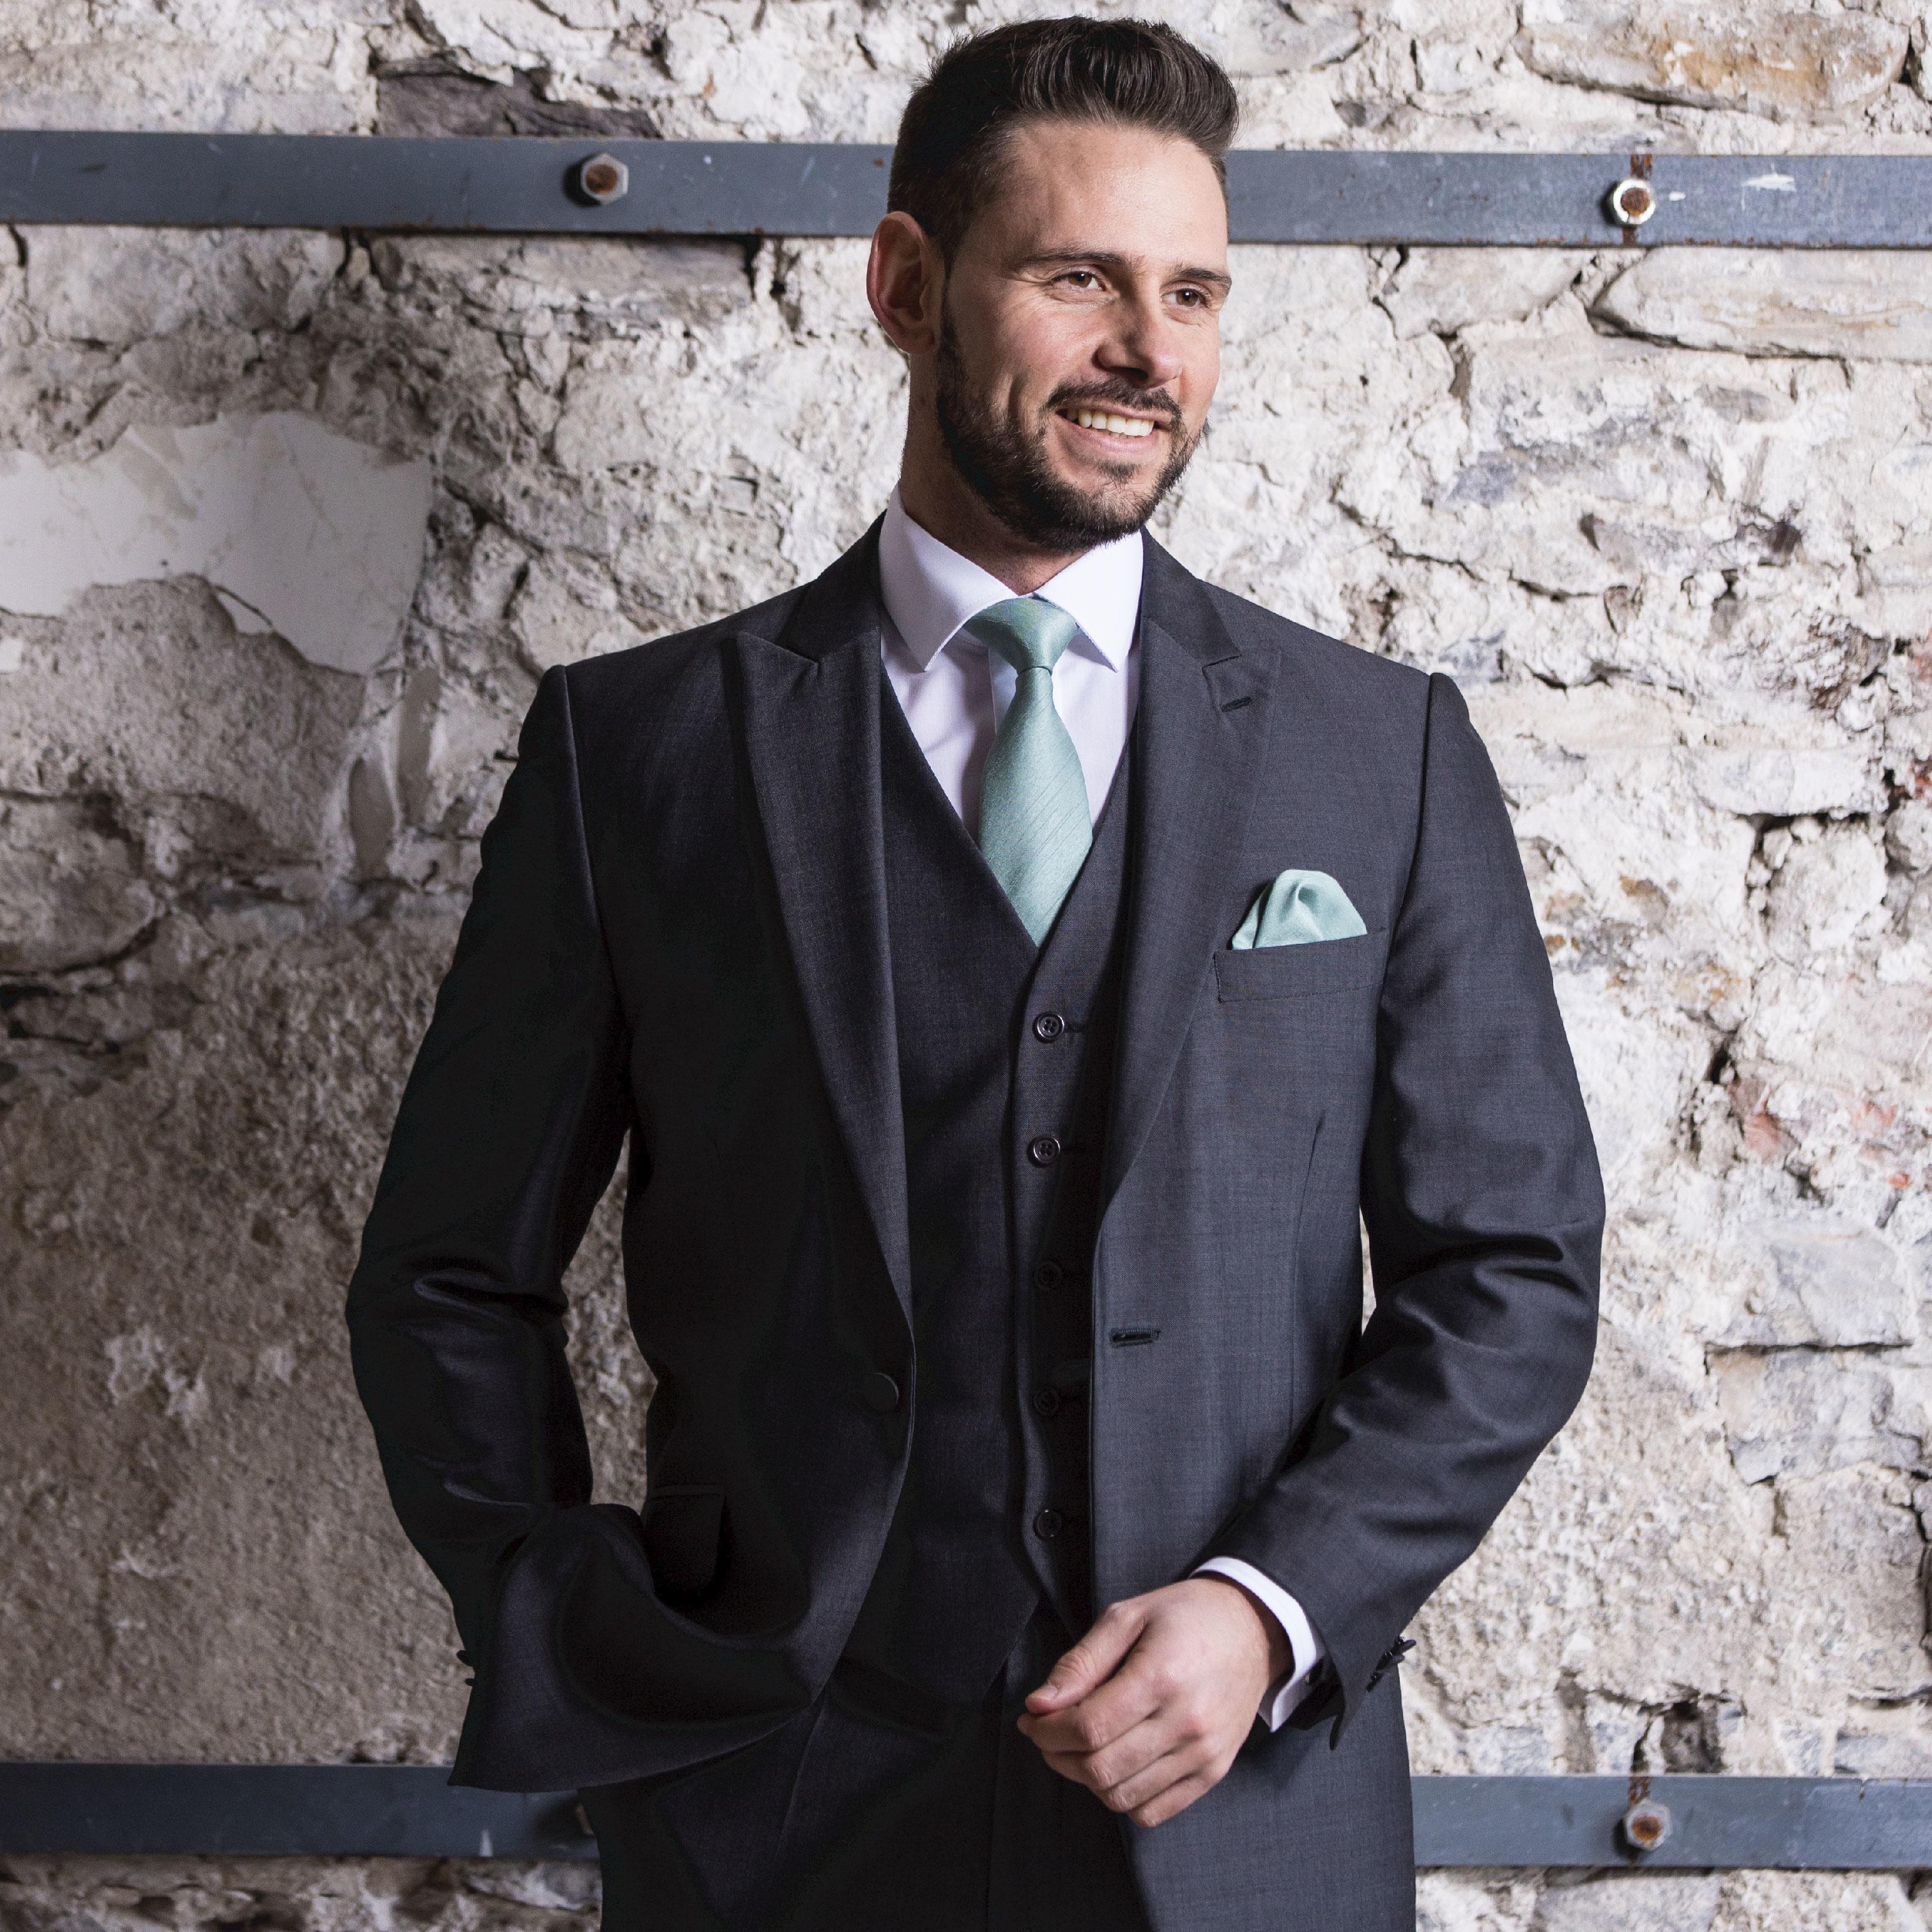 Men & Boy's Lightweight Wedding Suit | Available to Hire or Buy ...